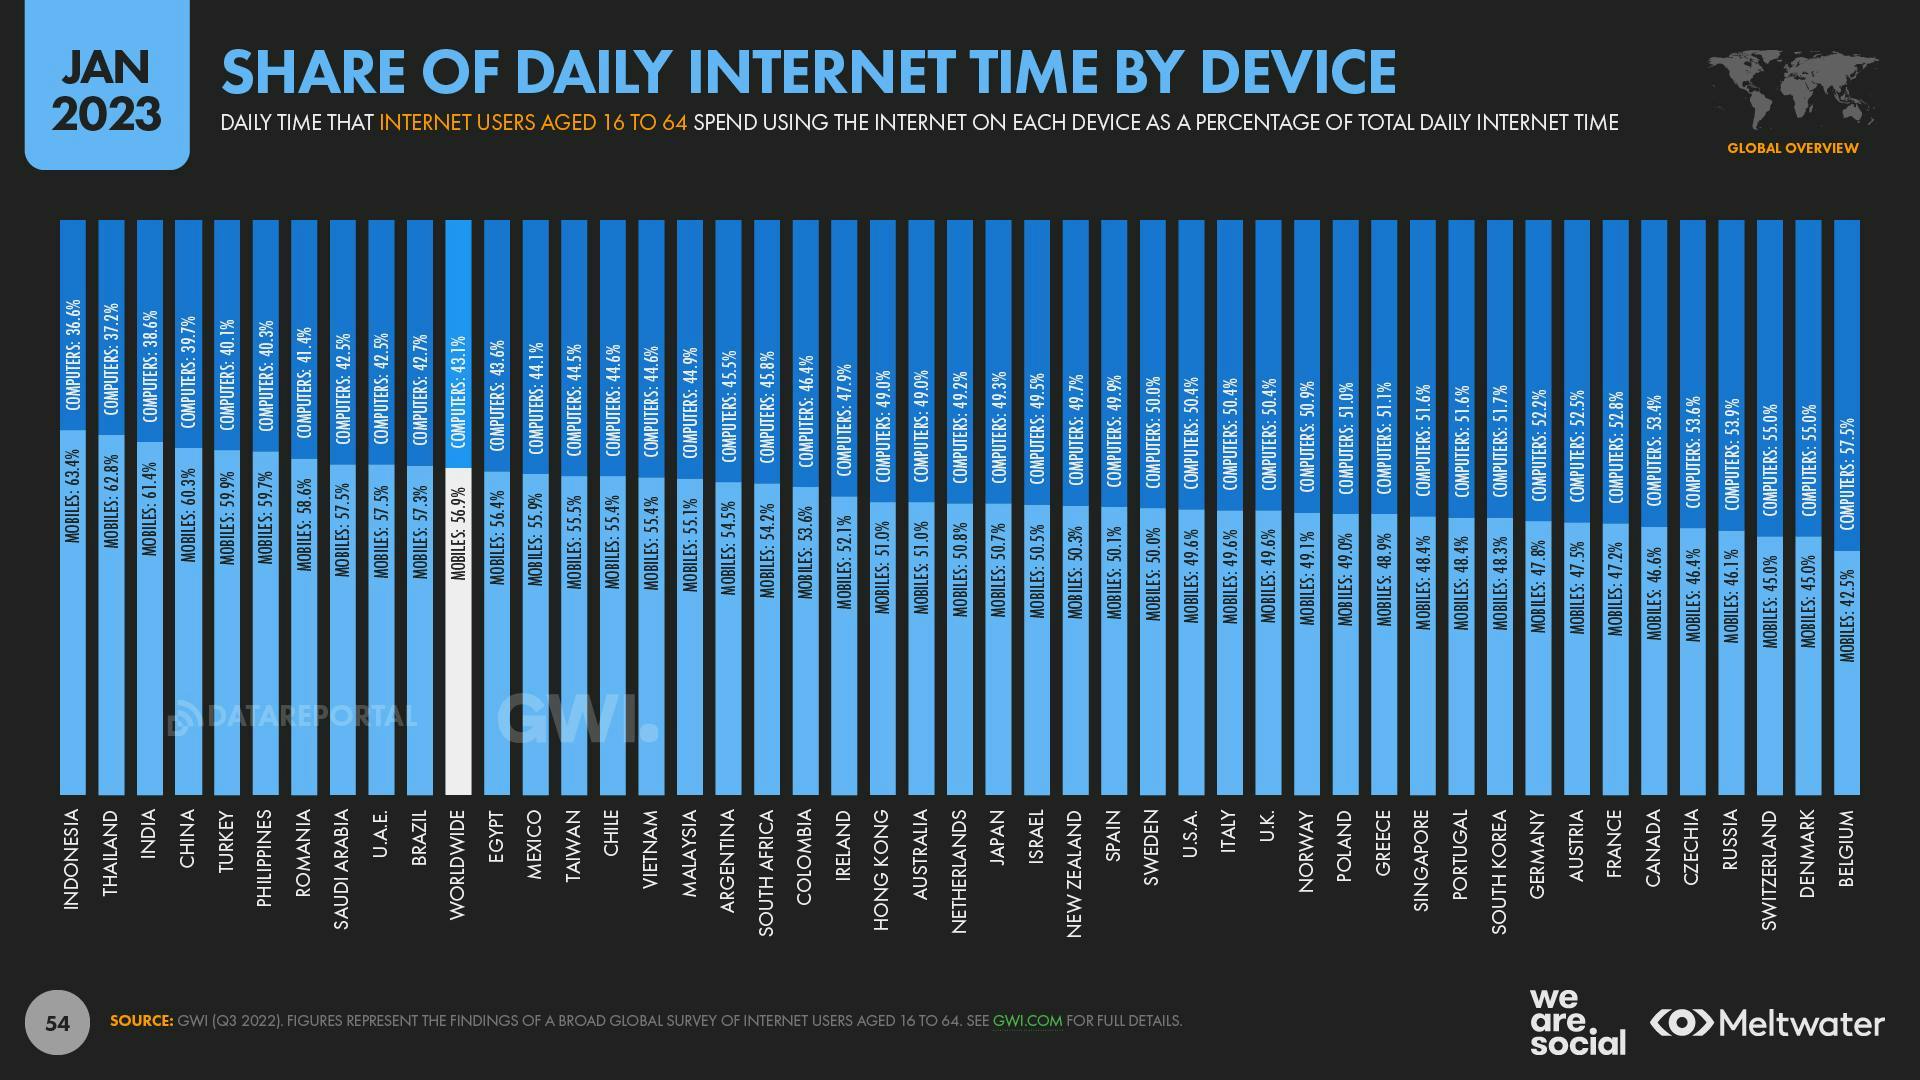 share of daily internet time by device 2023